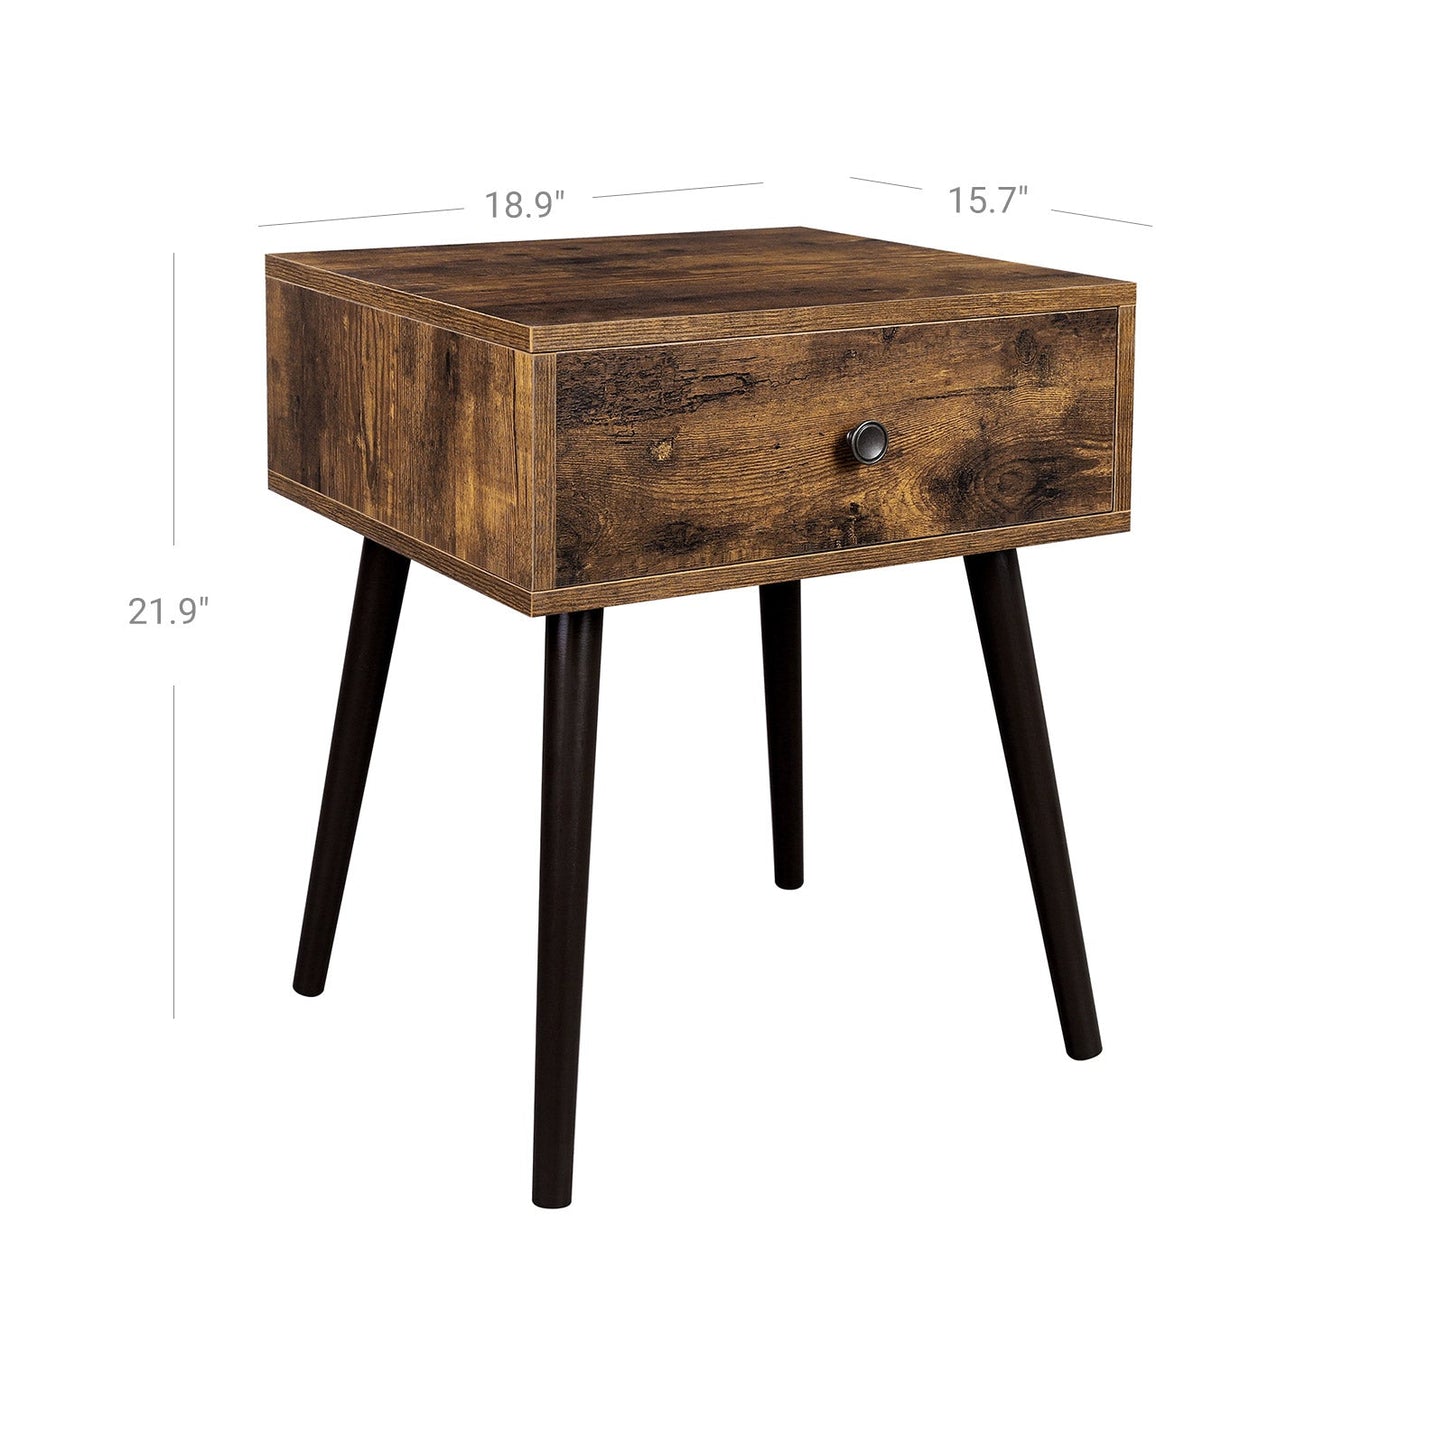 End Table with a Drawer and Tapered Legs